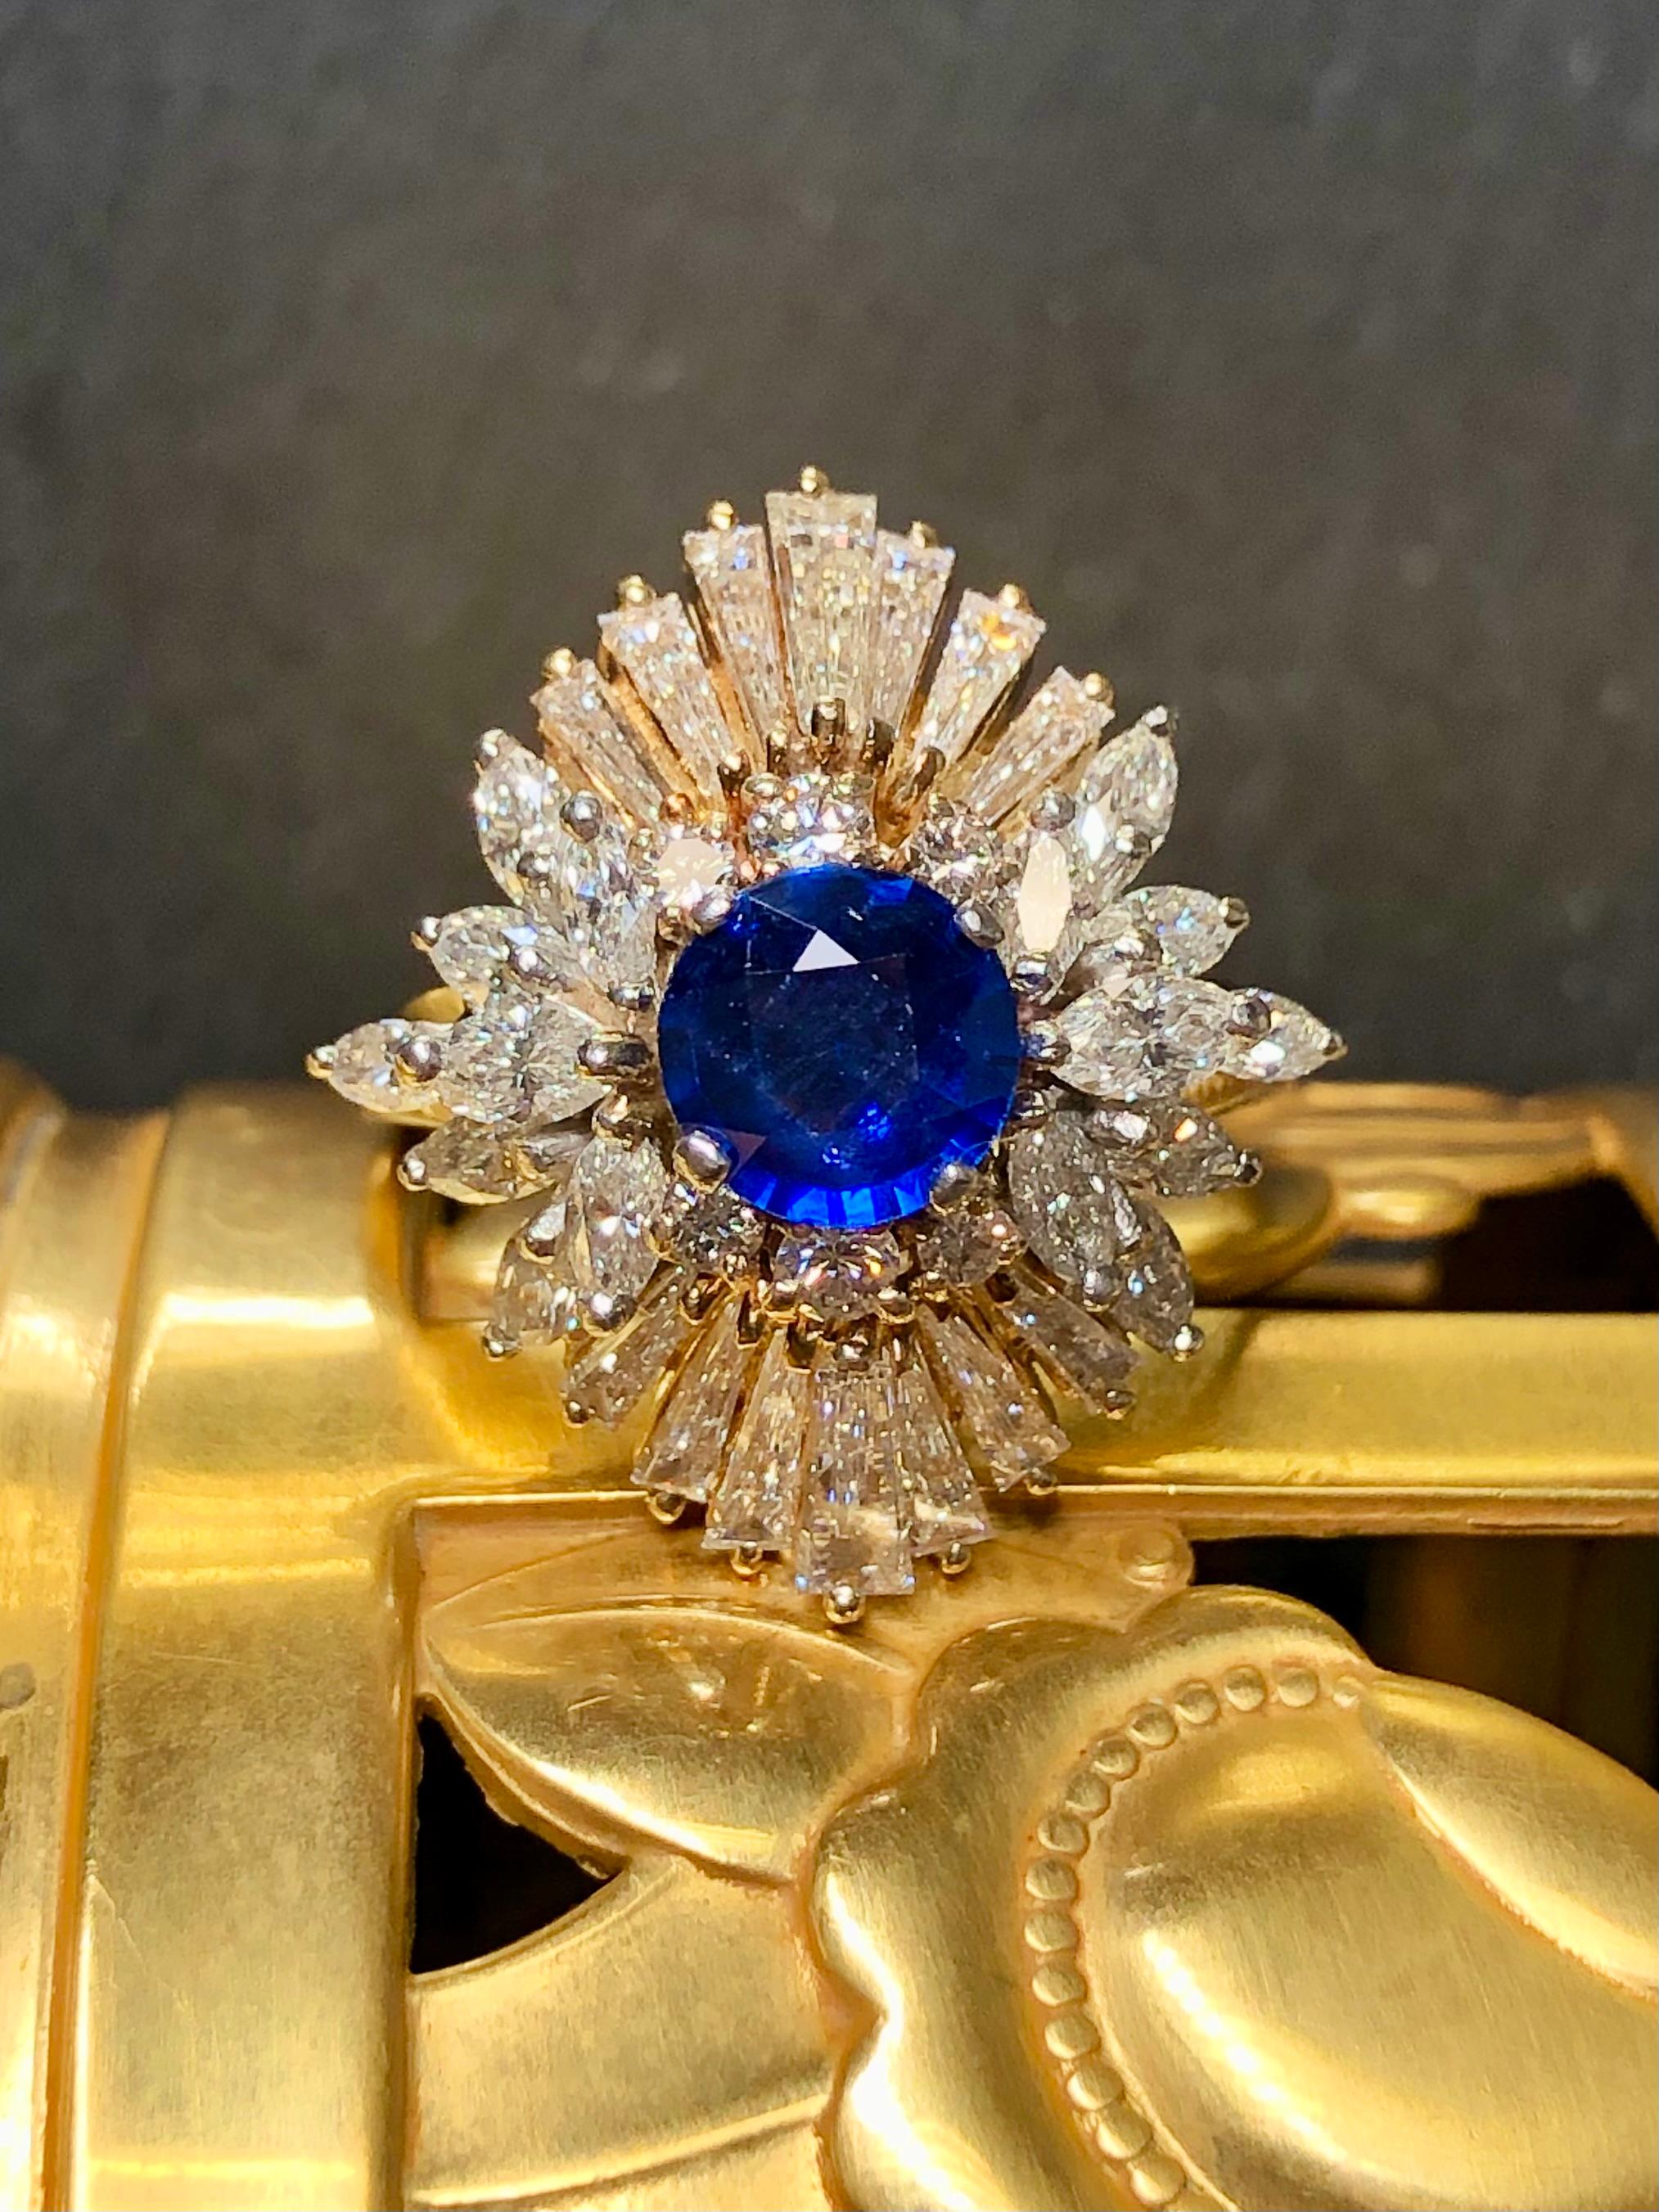 
A fabulous cocktail ring hand done in platinum and 18K yellow gold centered by an approximately 1.63ct royal blue natural Ceylon sapphire (with GIA report) surrounded by absolutely gorgeous tapered baguette, marquise and round diamonds having a